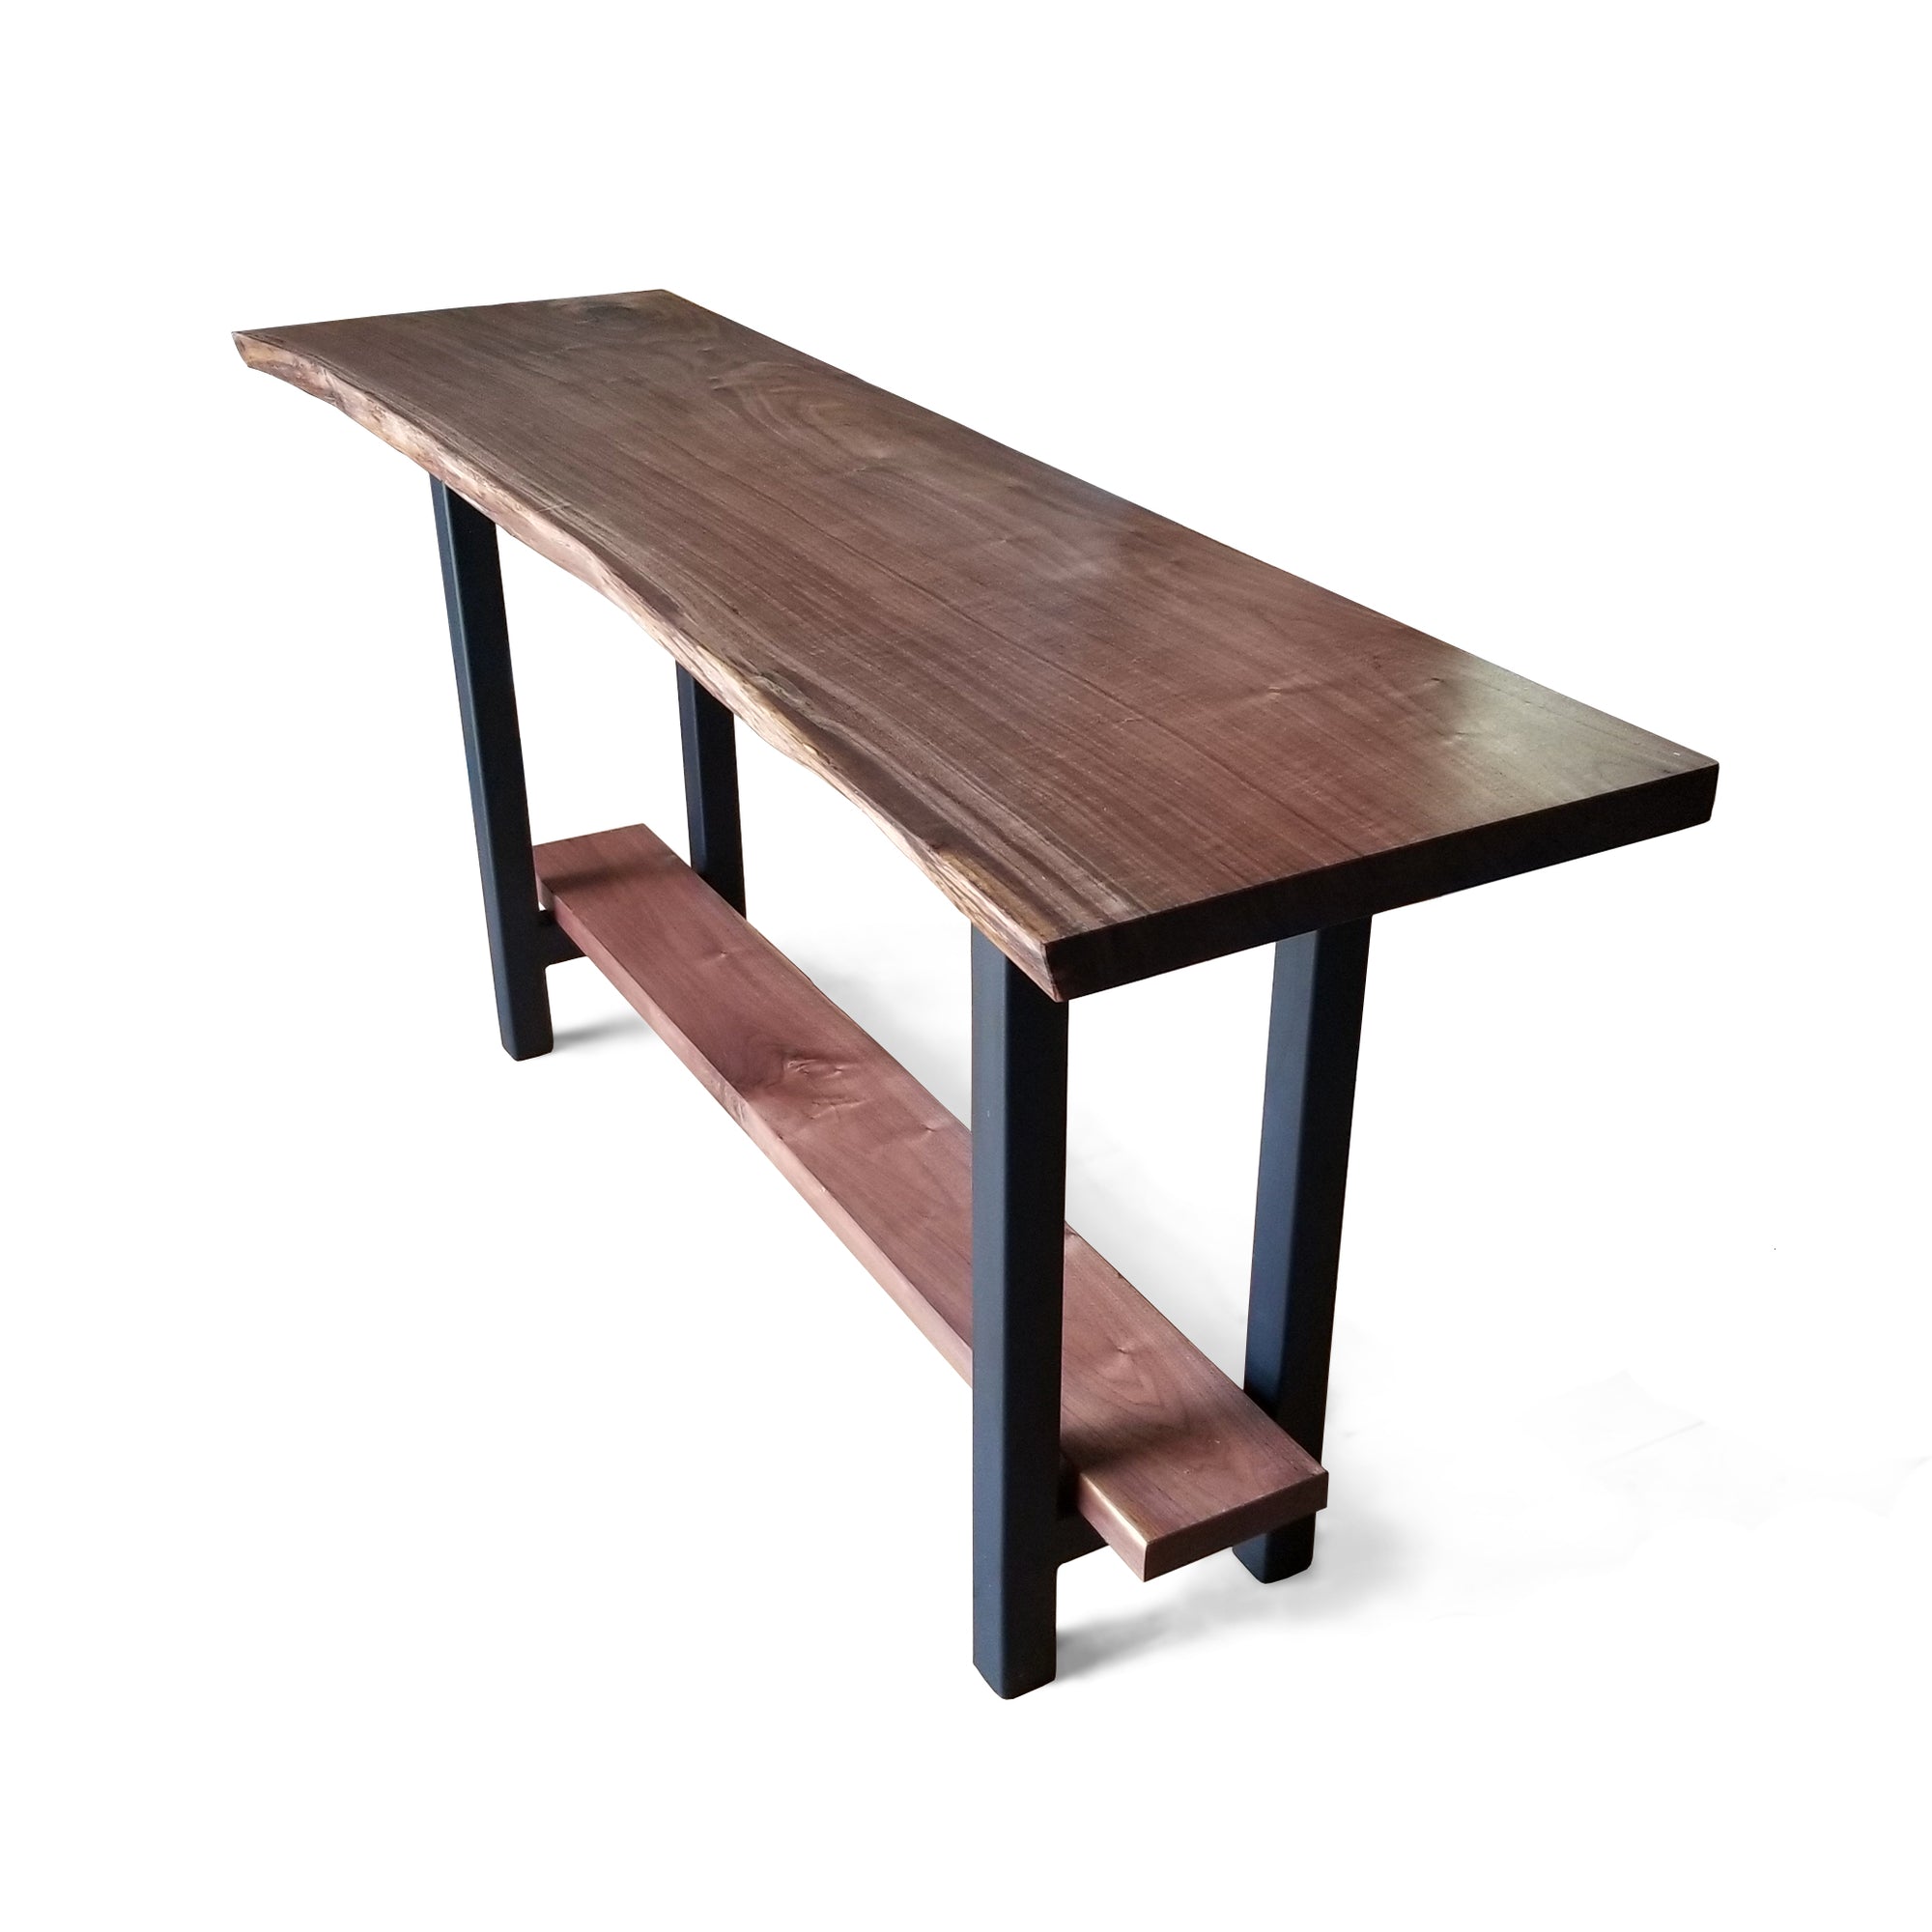 Live-edge Entry Table